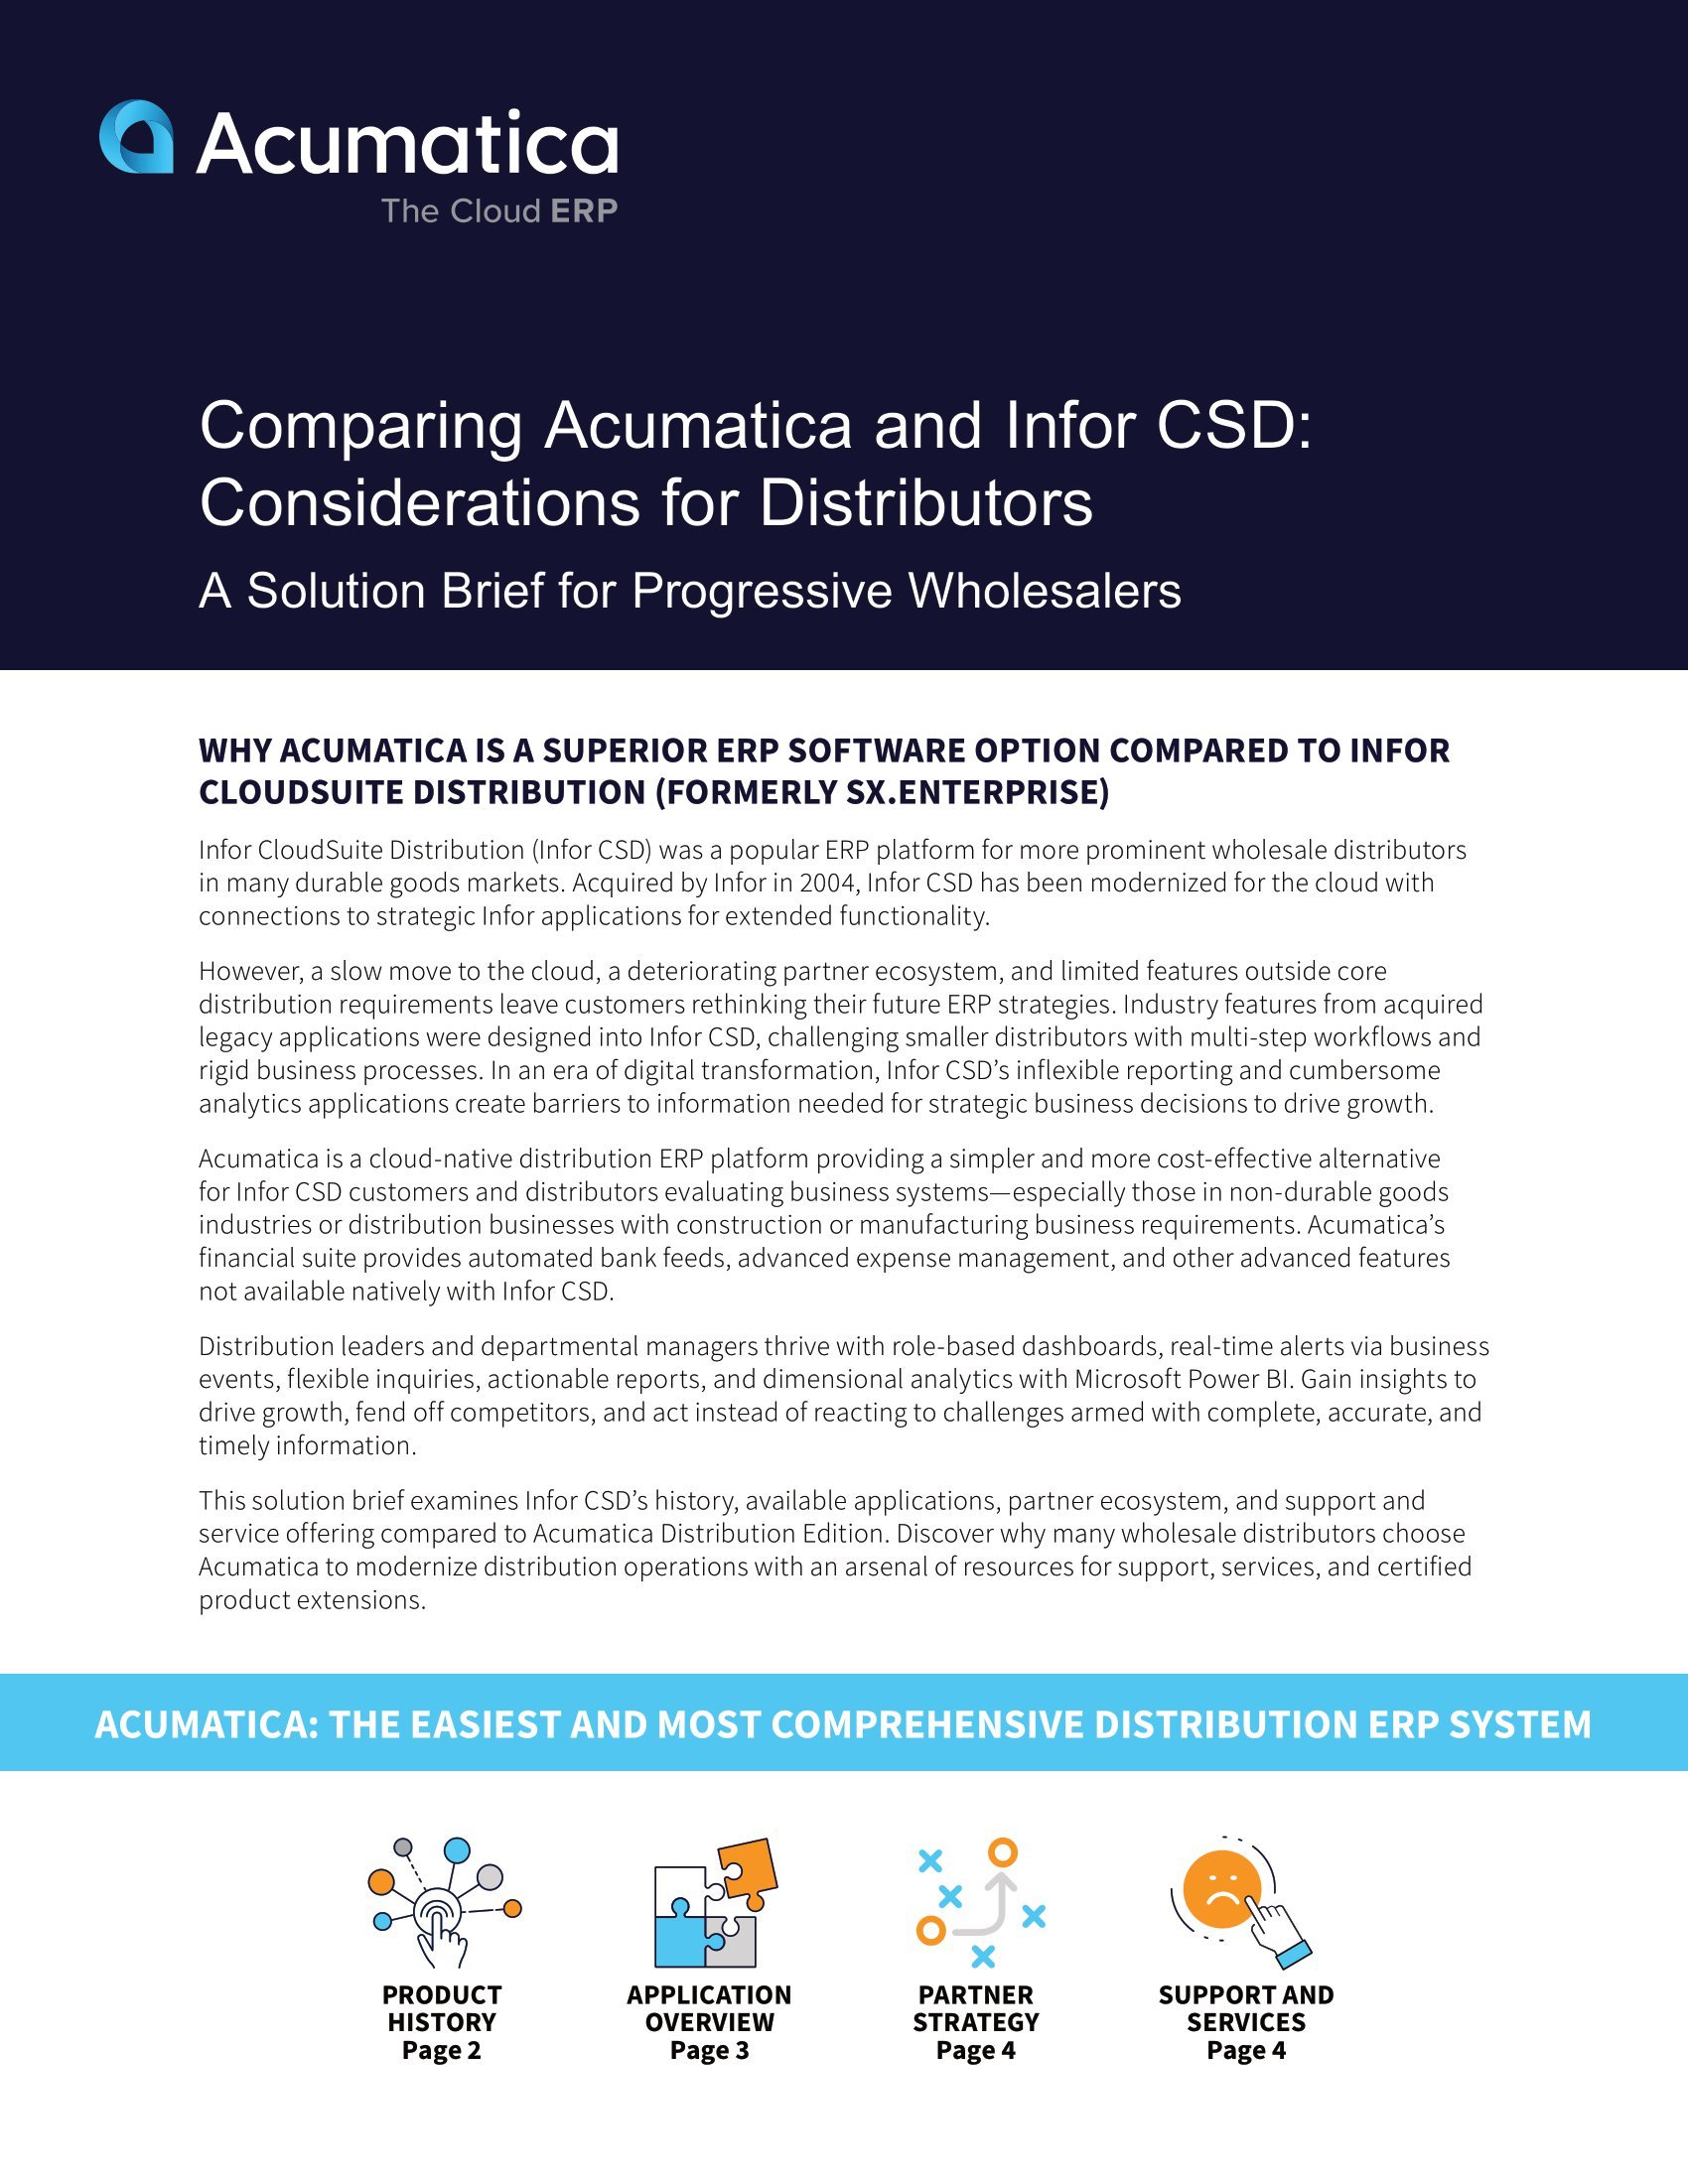 Discover Why Acumatica Is A Superior Distribution ERP System Compared to Infor CloudSuite Distribution (CSD)